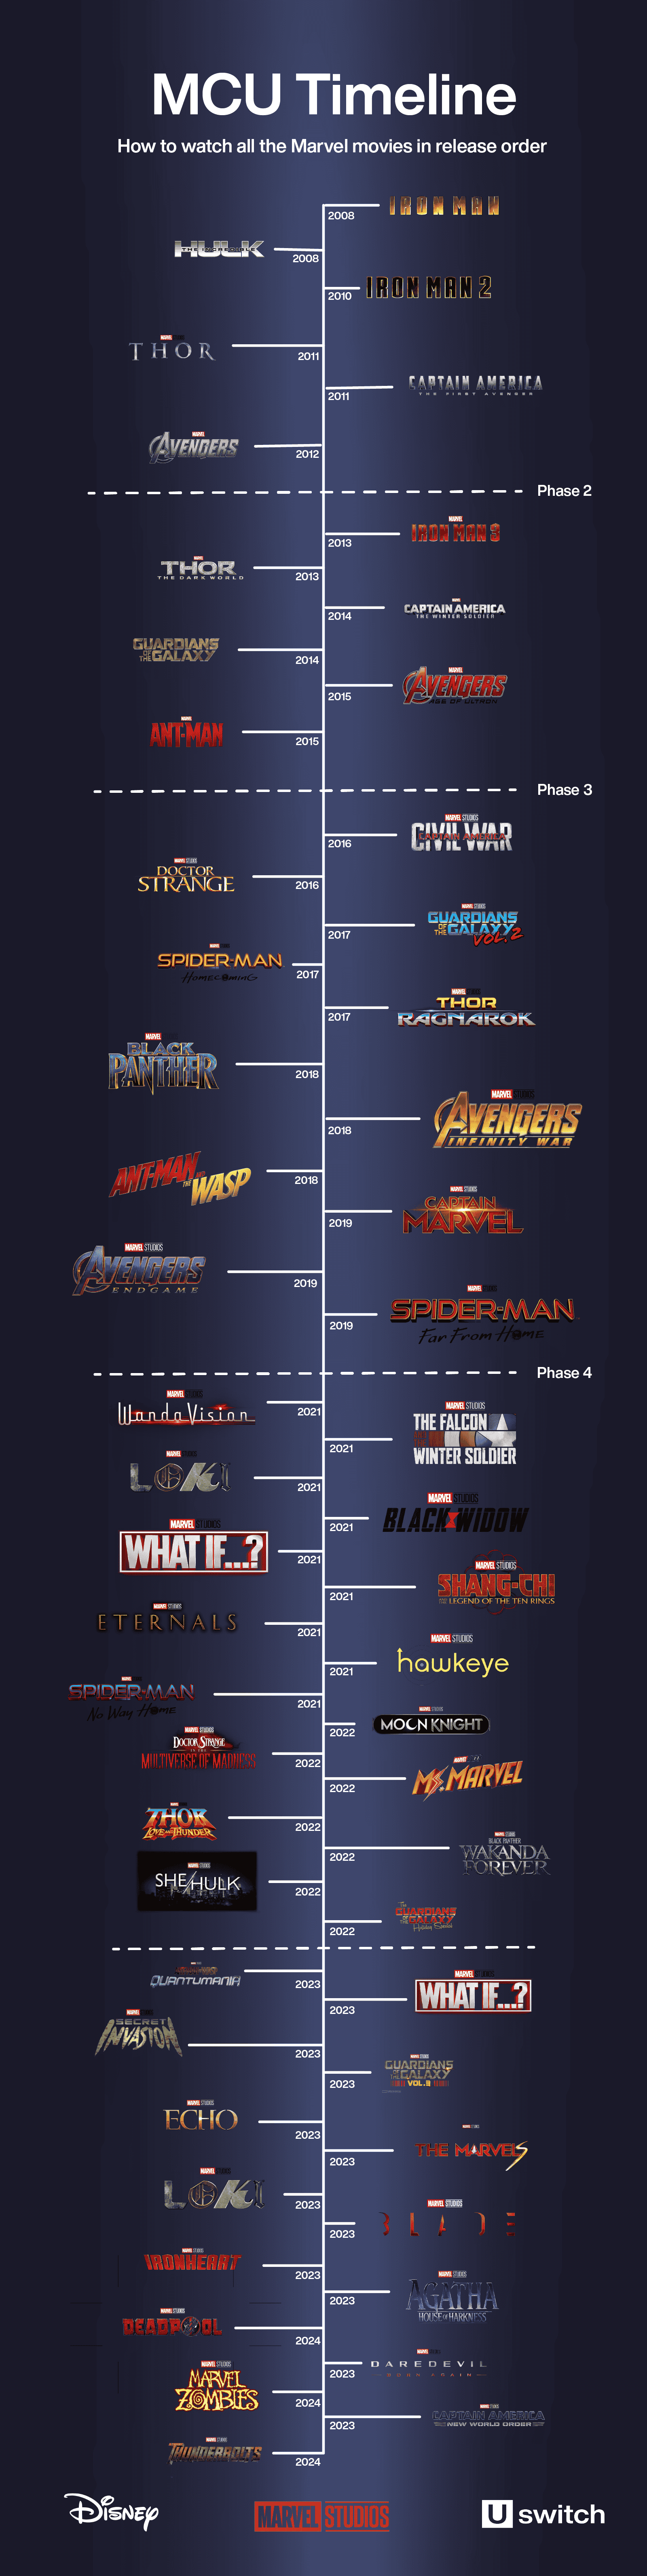 Best Order to Watch Marvel - How to Watch Marvel Timeline